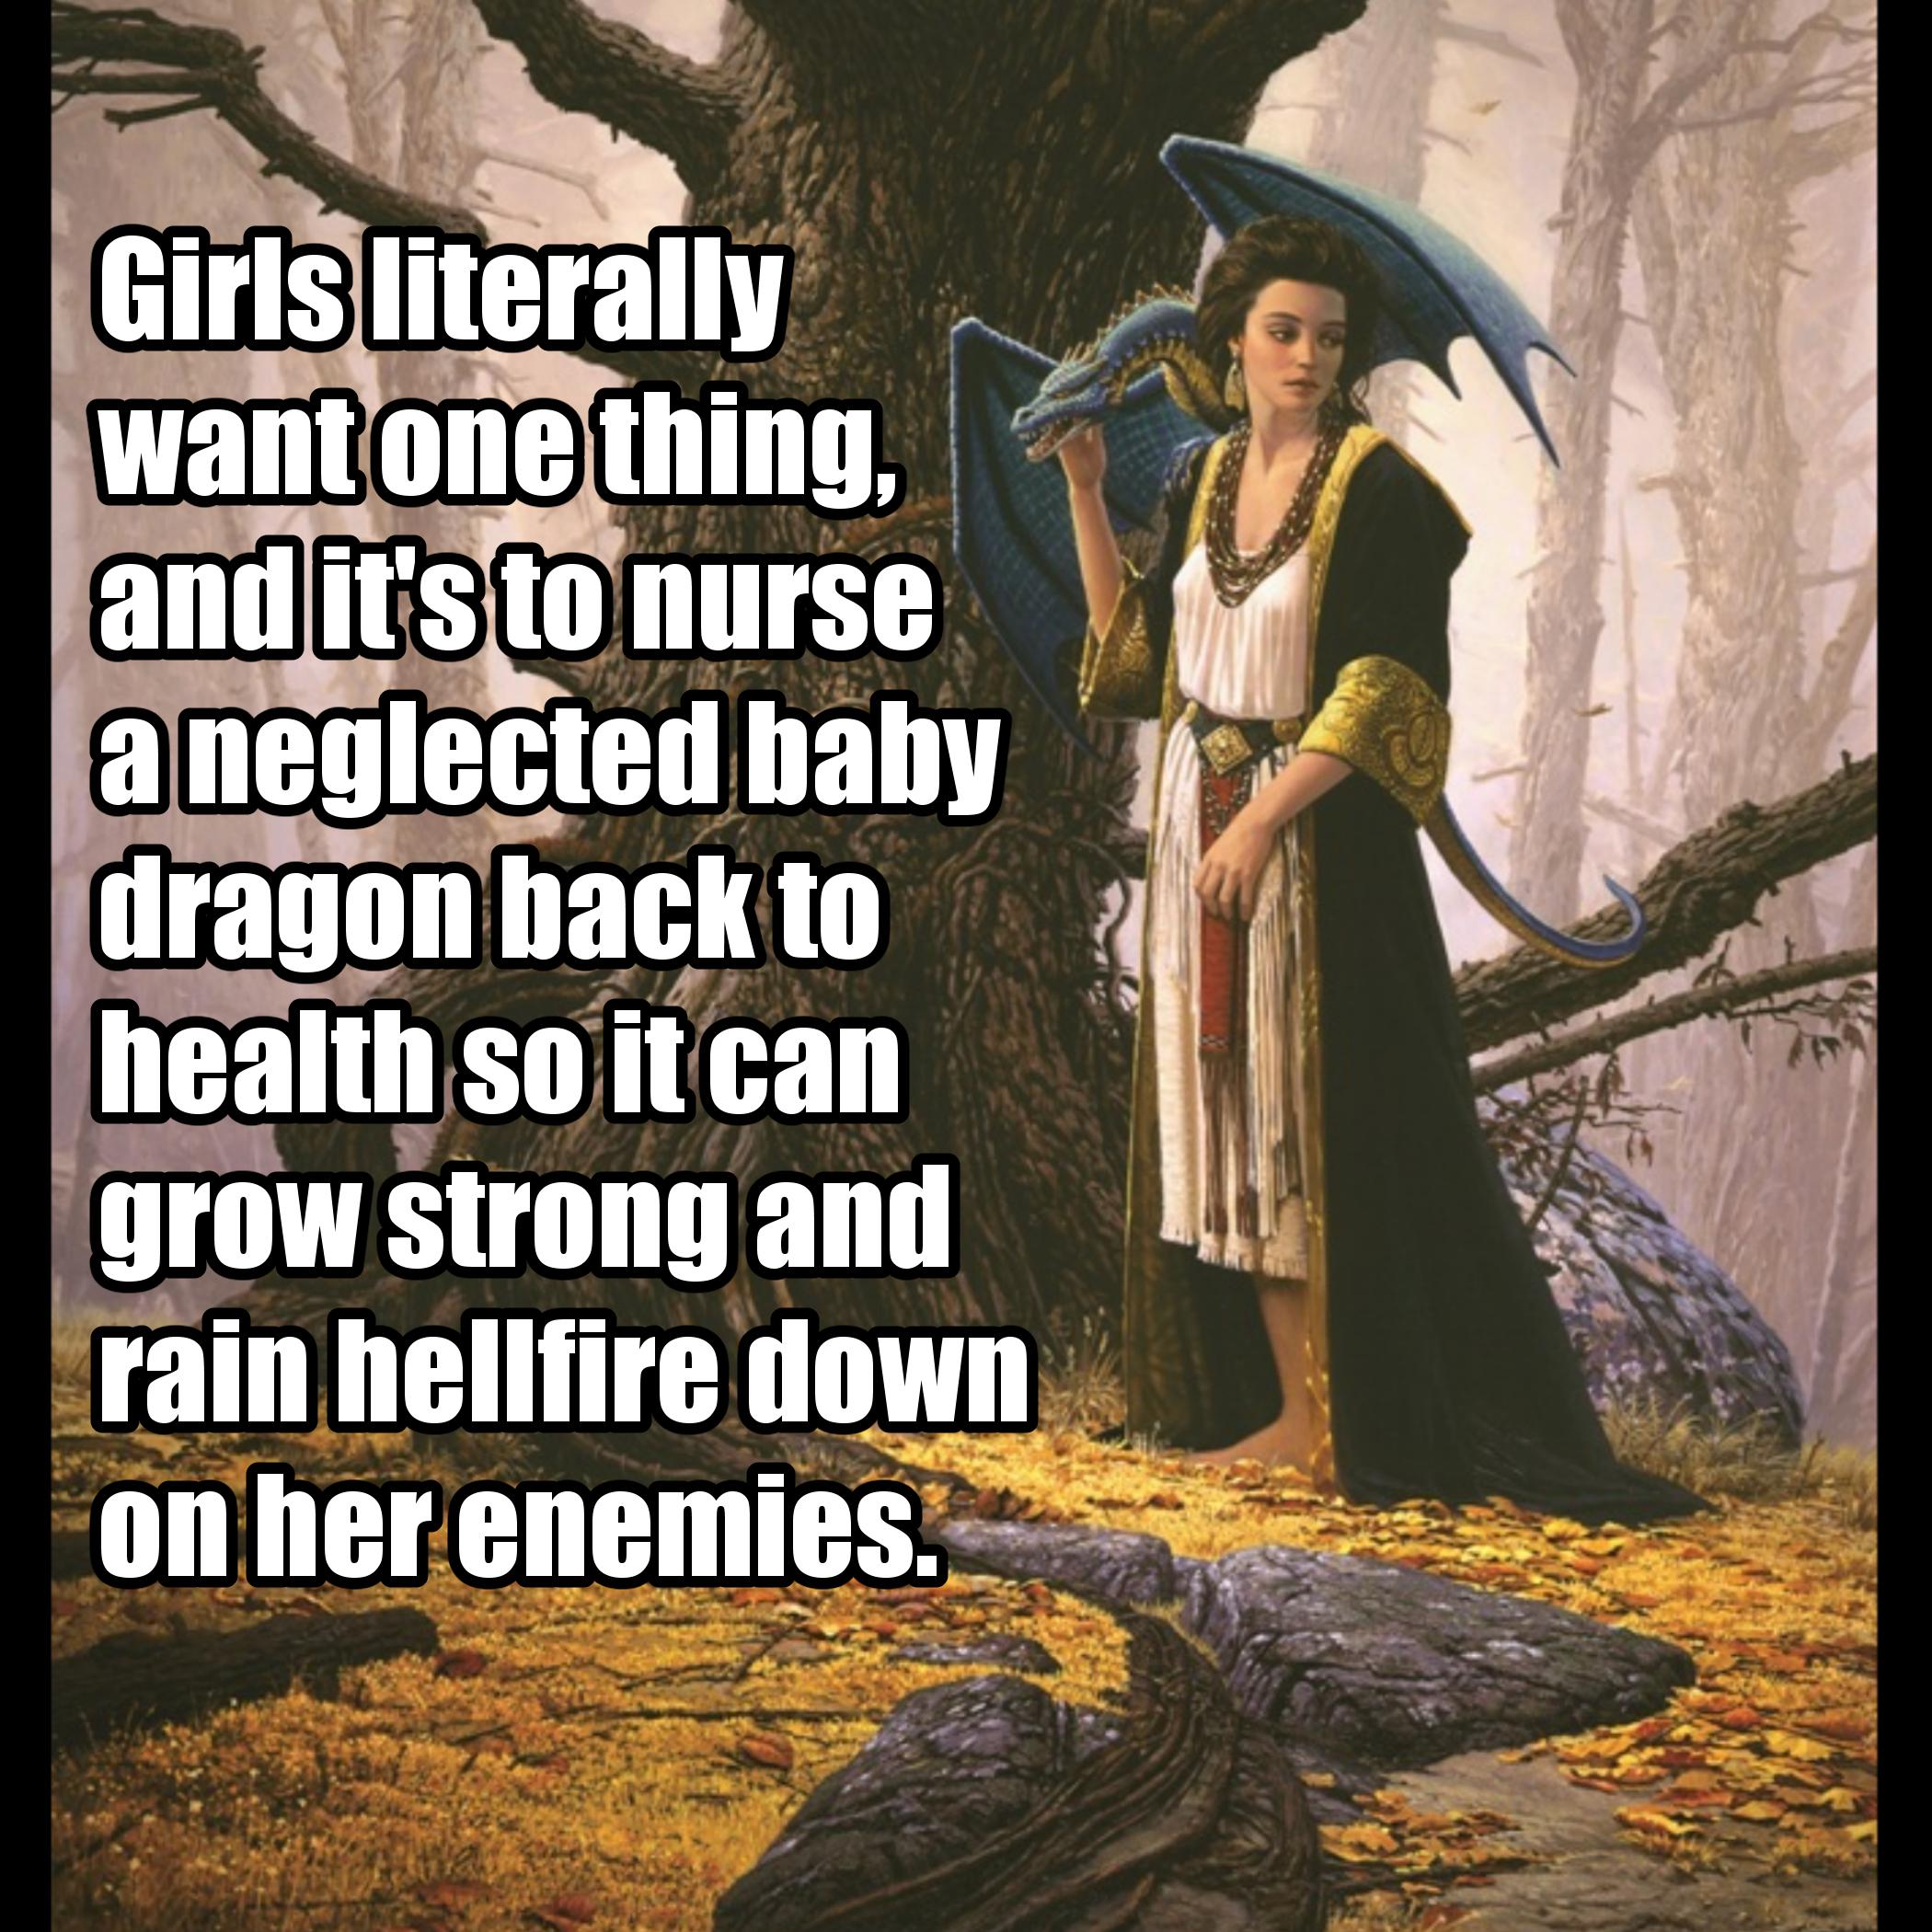 funny pics and memes - religion - Girls literally want one thing, and it's to nurse a neglected baby dragon back to health so it can grow strong and rain hellfire down on her enemies.